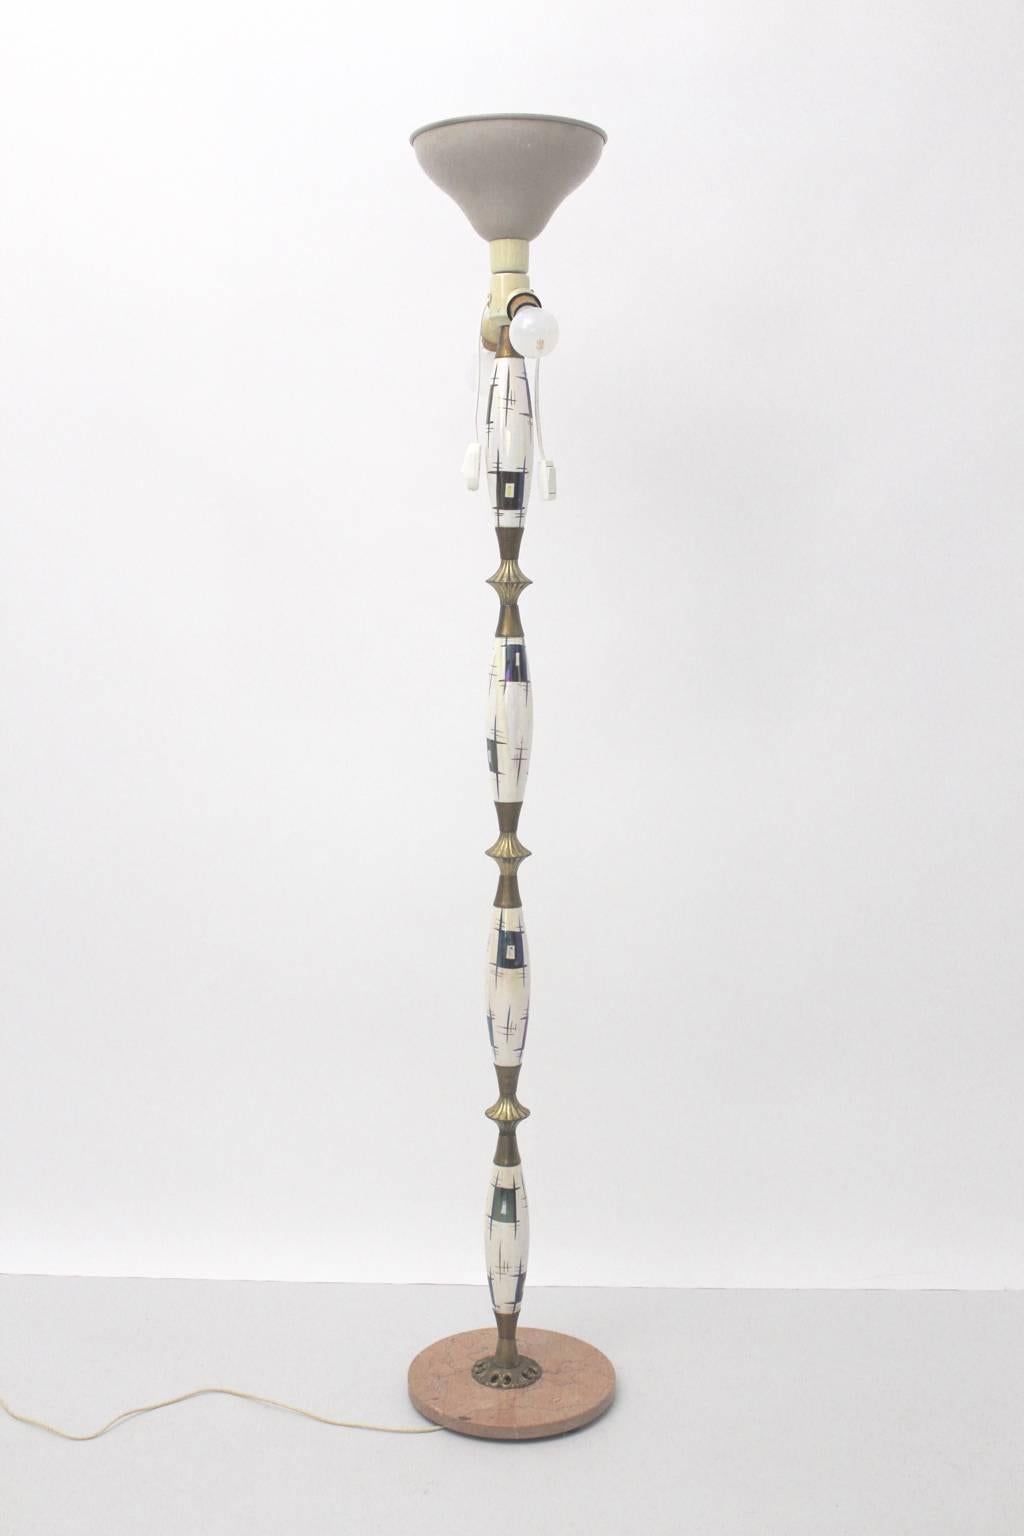 Mid Century Modern vintage floor lamp from marble and porcelain designed in Italy 1940s.
While the base consists of a disc made of marble, the stem was made of hand-painted porcelain with brass fittings and the upper part consists of an uplighter